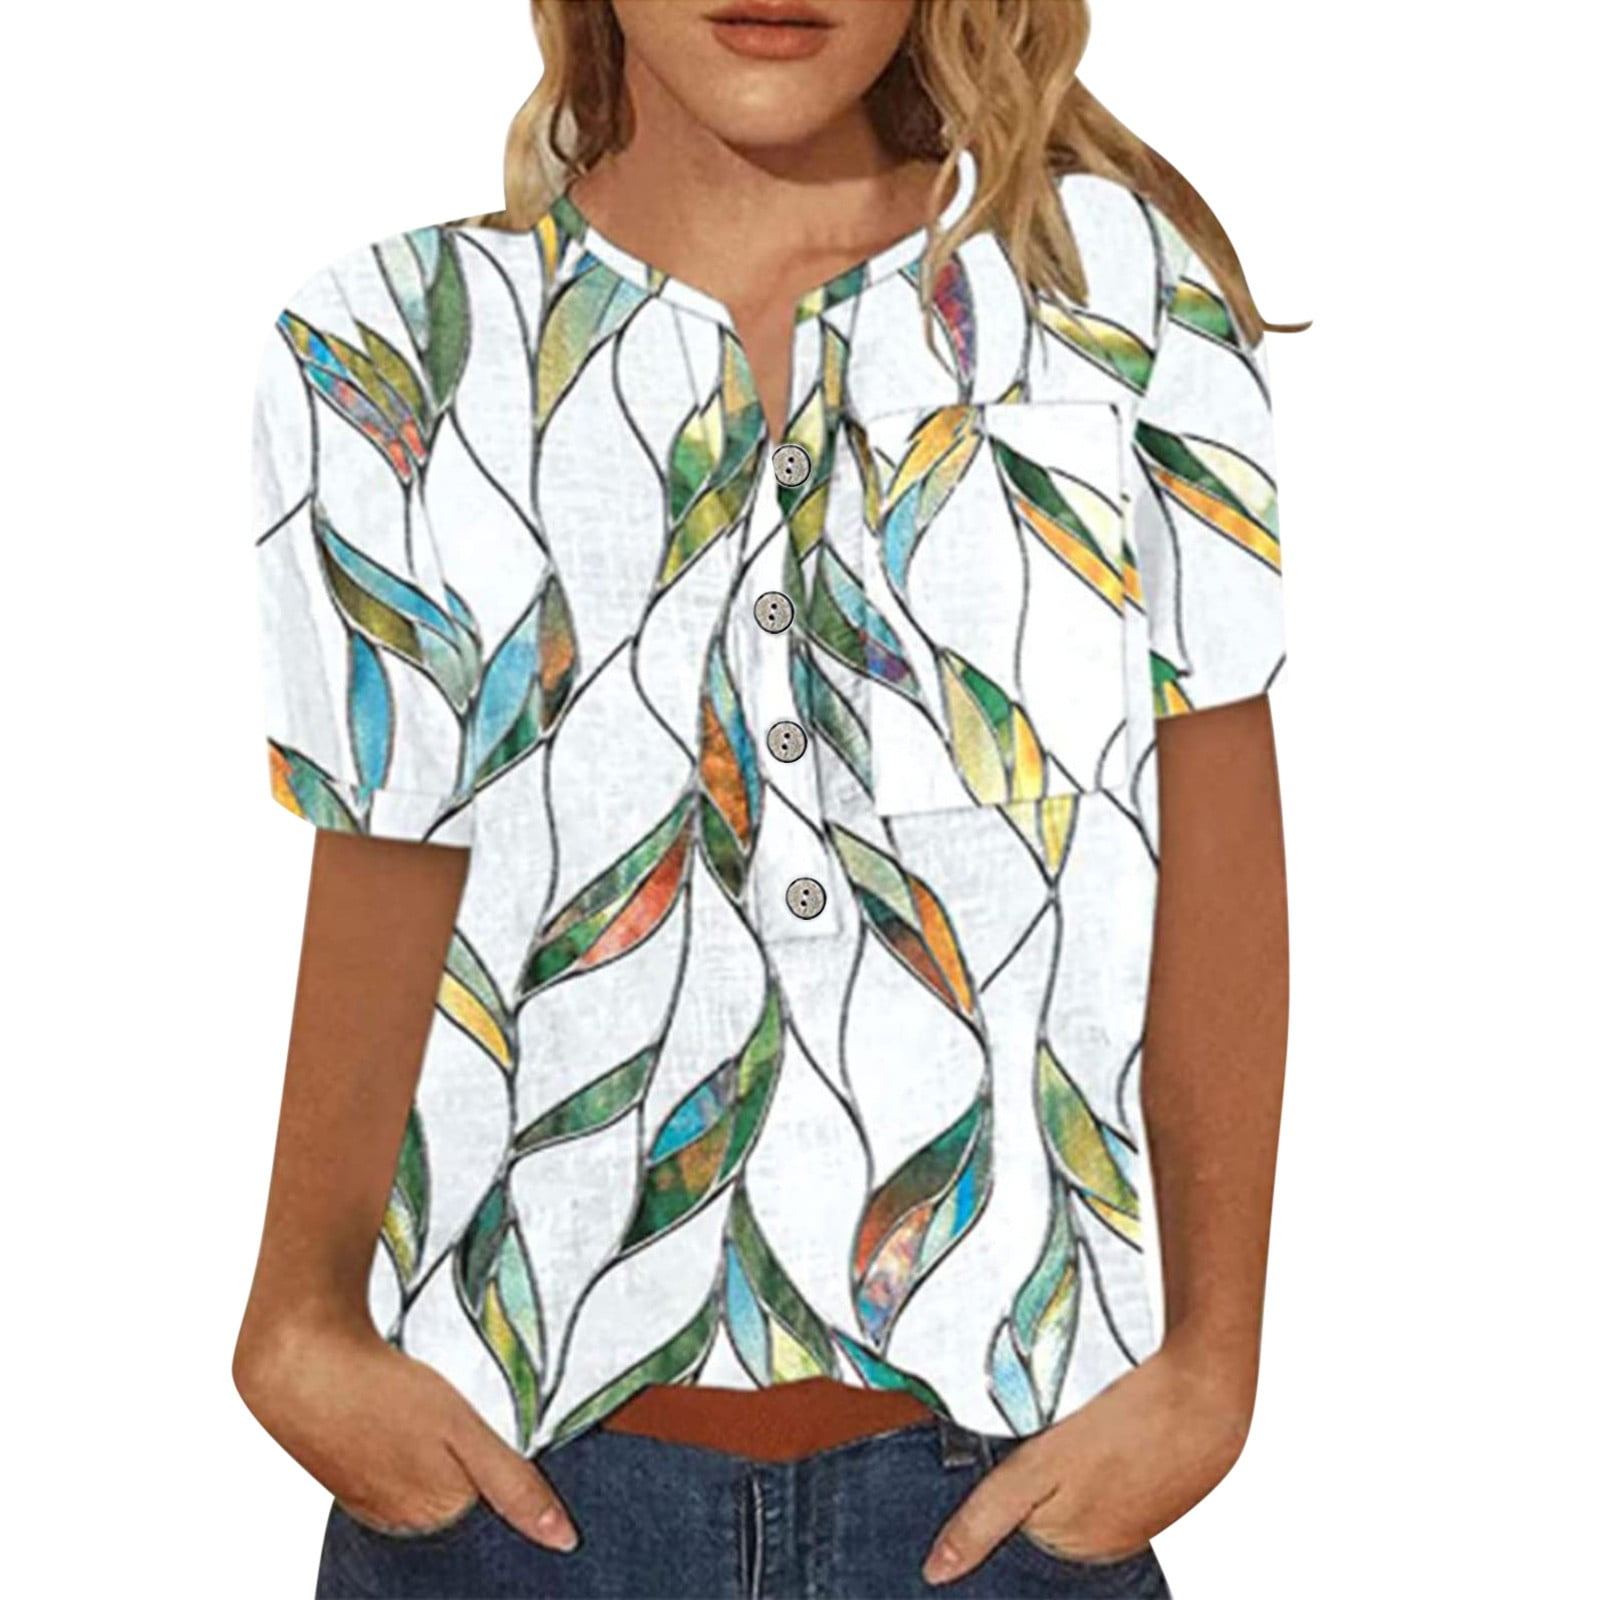 LBECLEY Teal Plus Ladies Tops and Blouses Summer Casual Printed Button ...